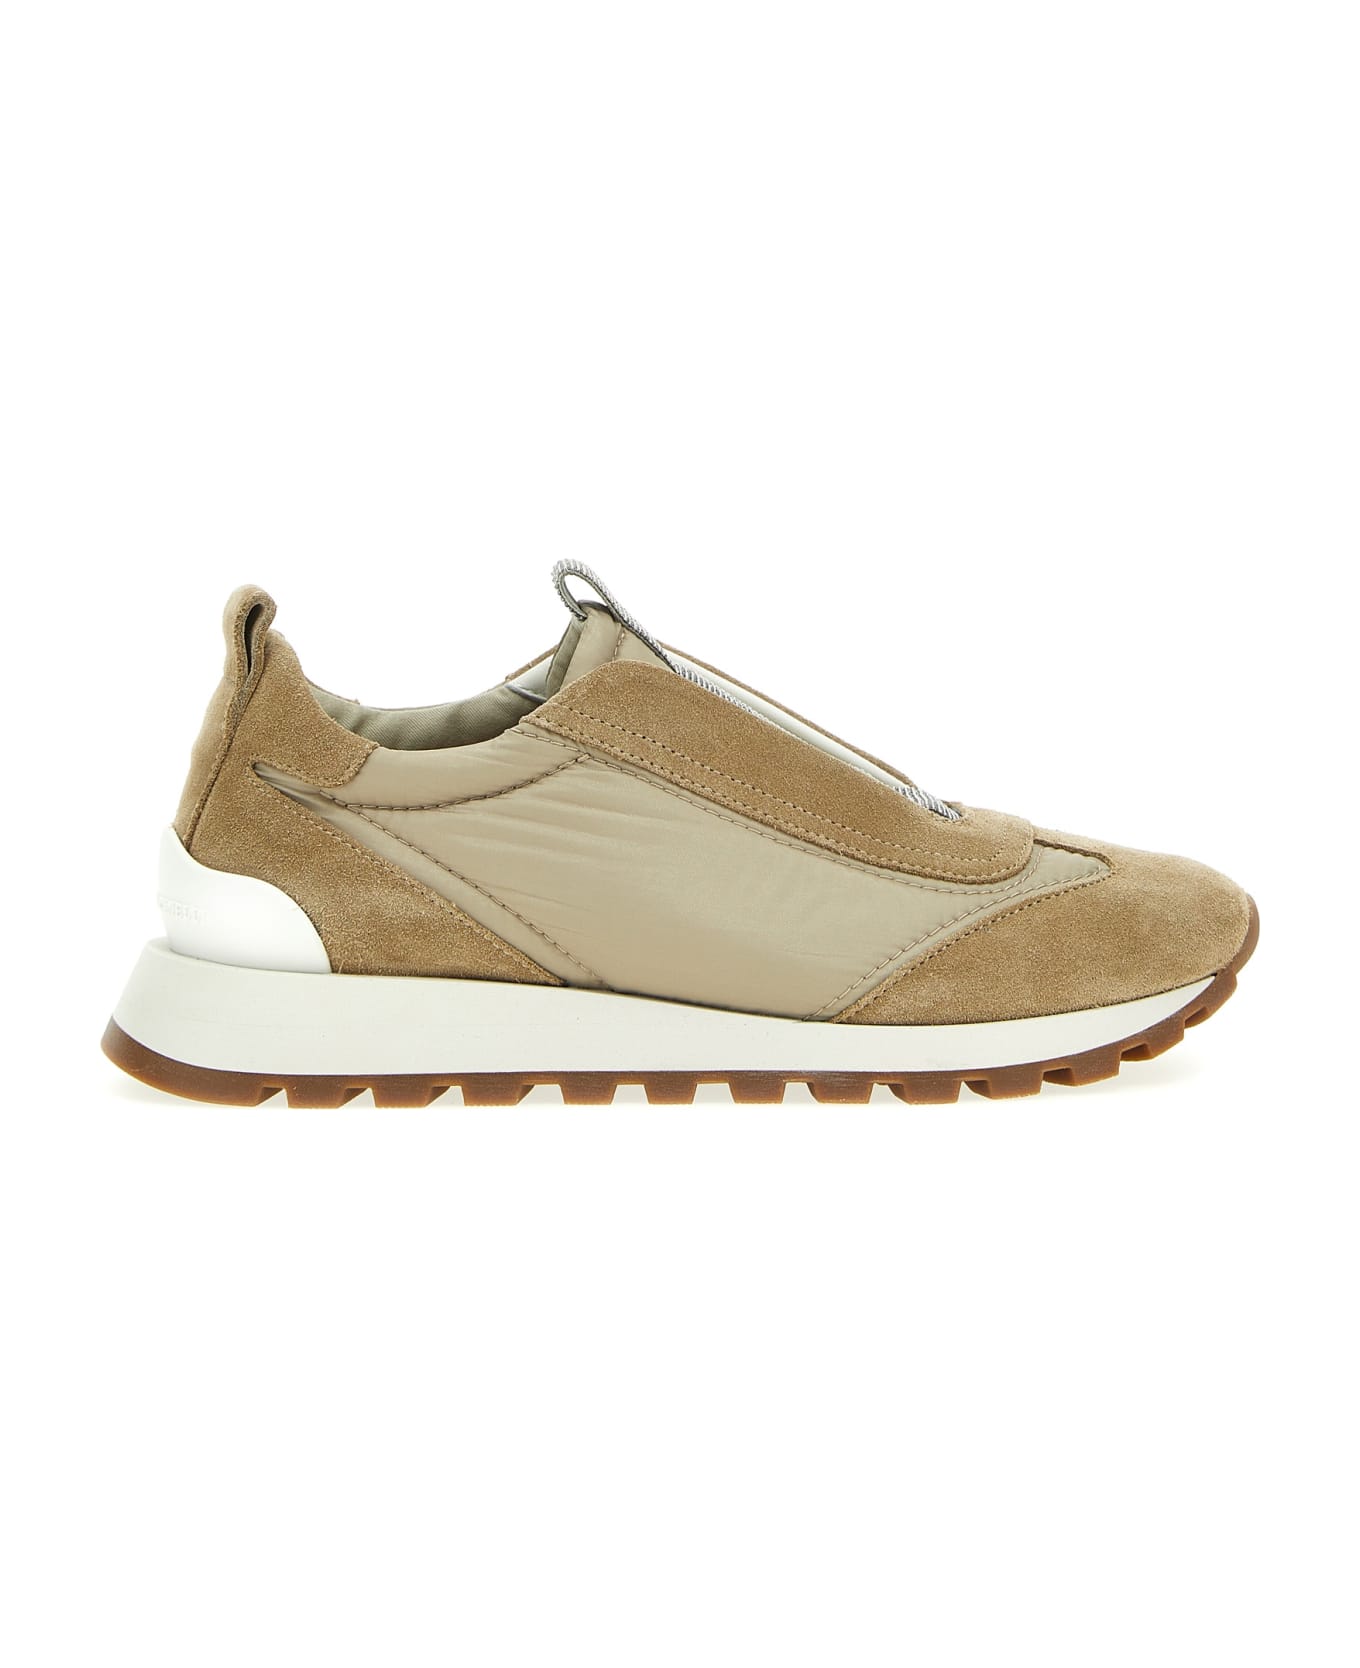 Brunello Cucinelli Runner Shoe In Suede And Taffeta Embellished With Threads Of Brilliant Monili - ROCK スニーカー